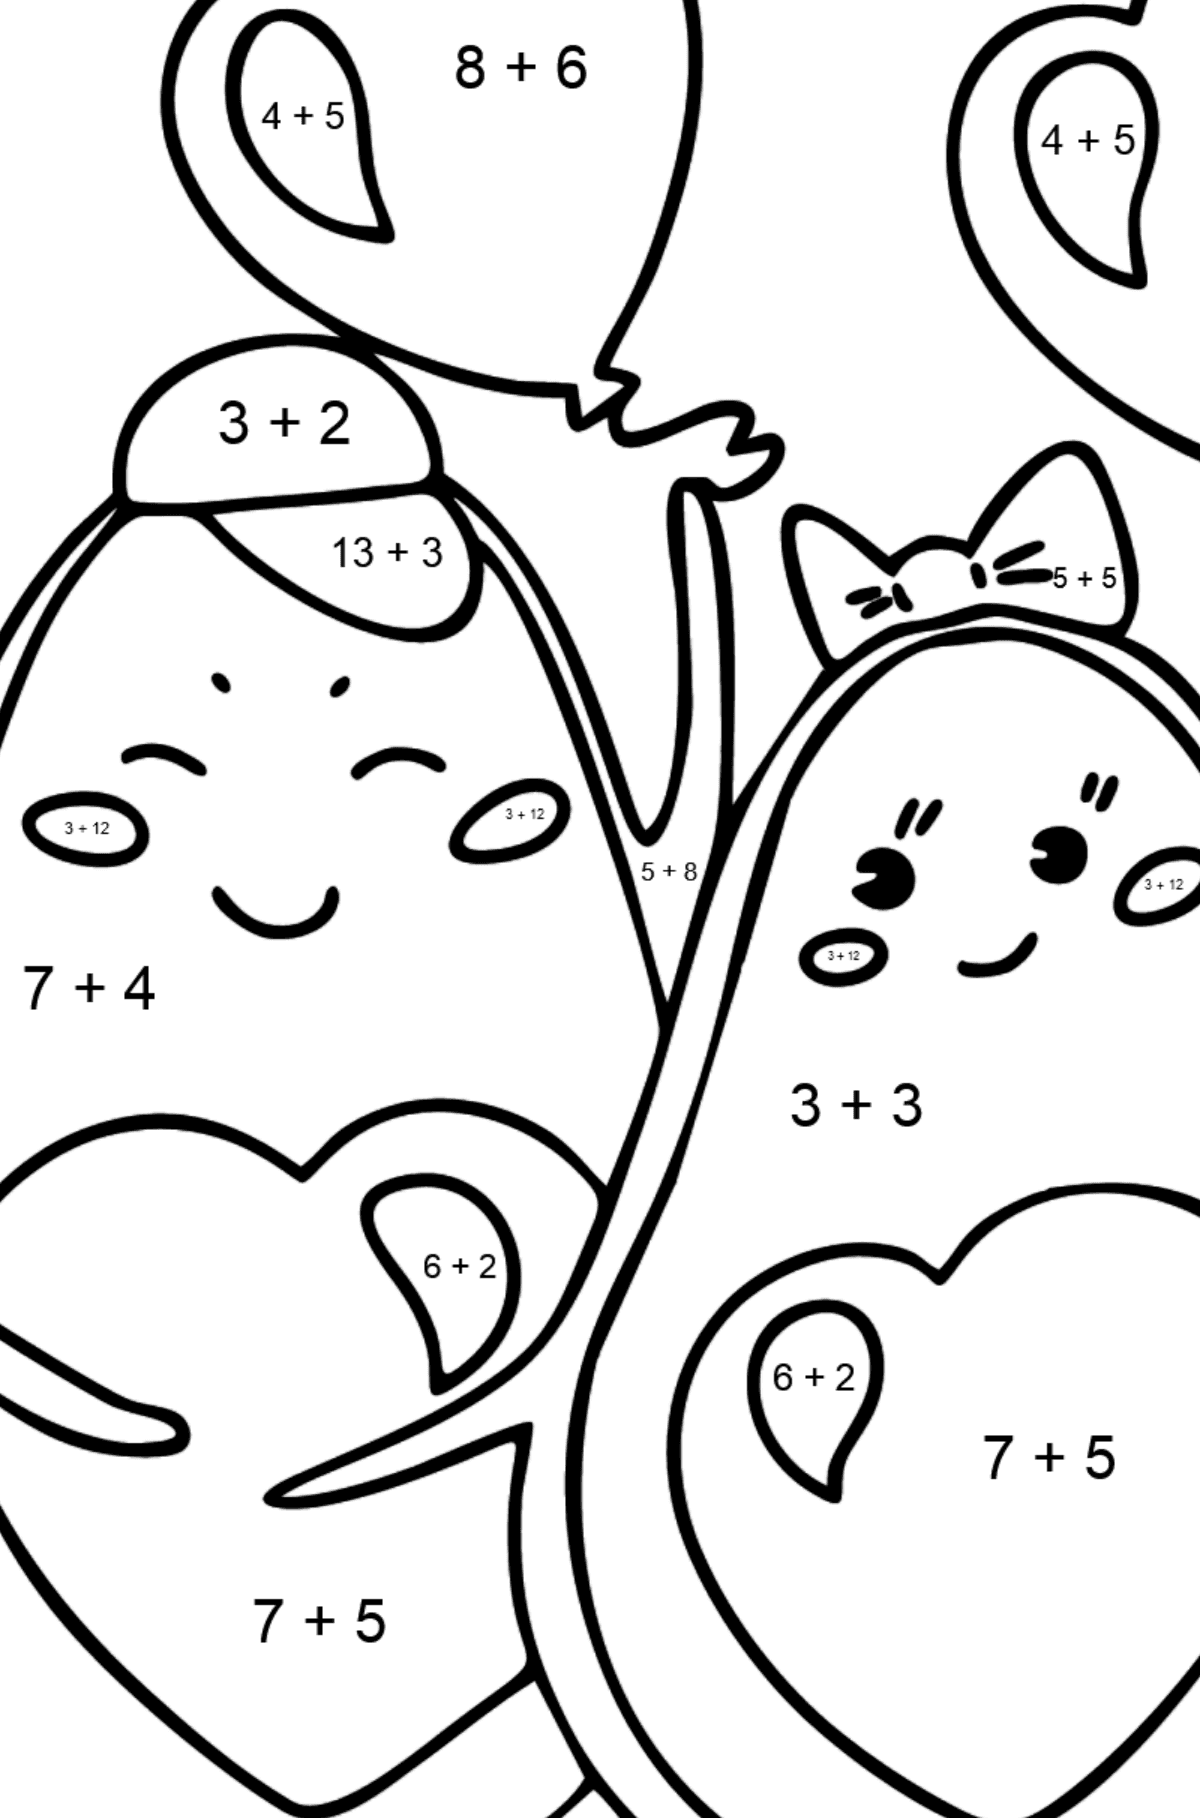 Avocado in Love coloring page - Math Coloring - Addition for Kids